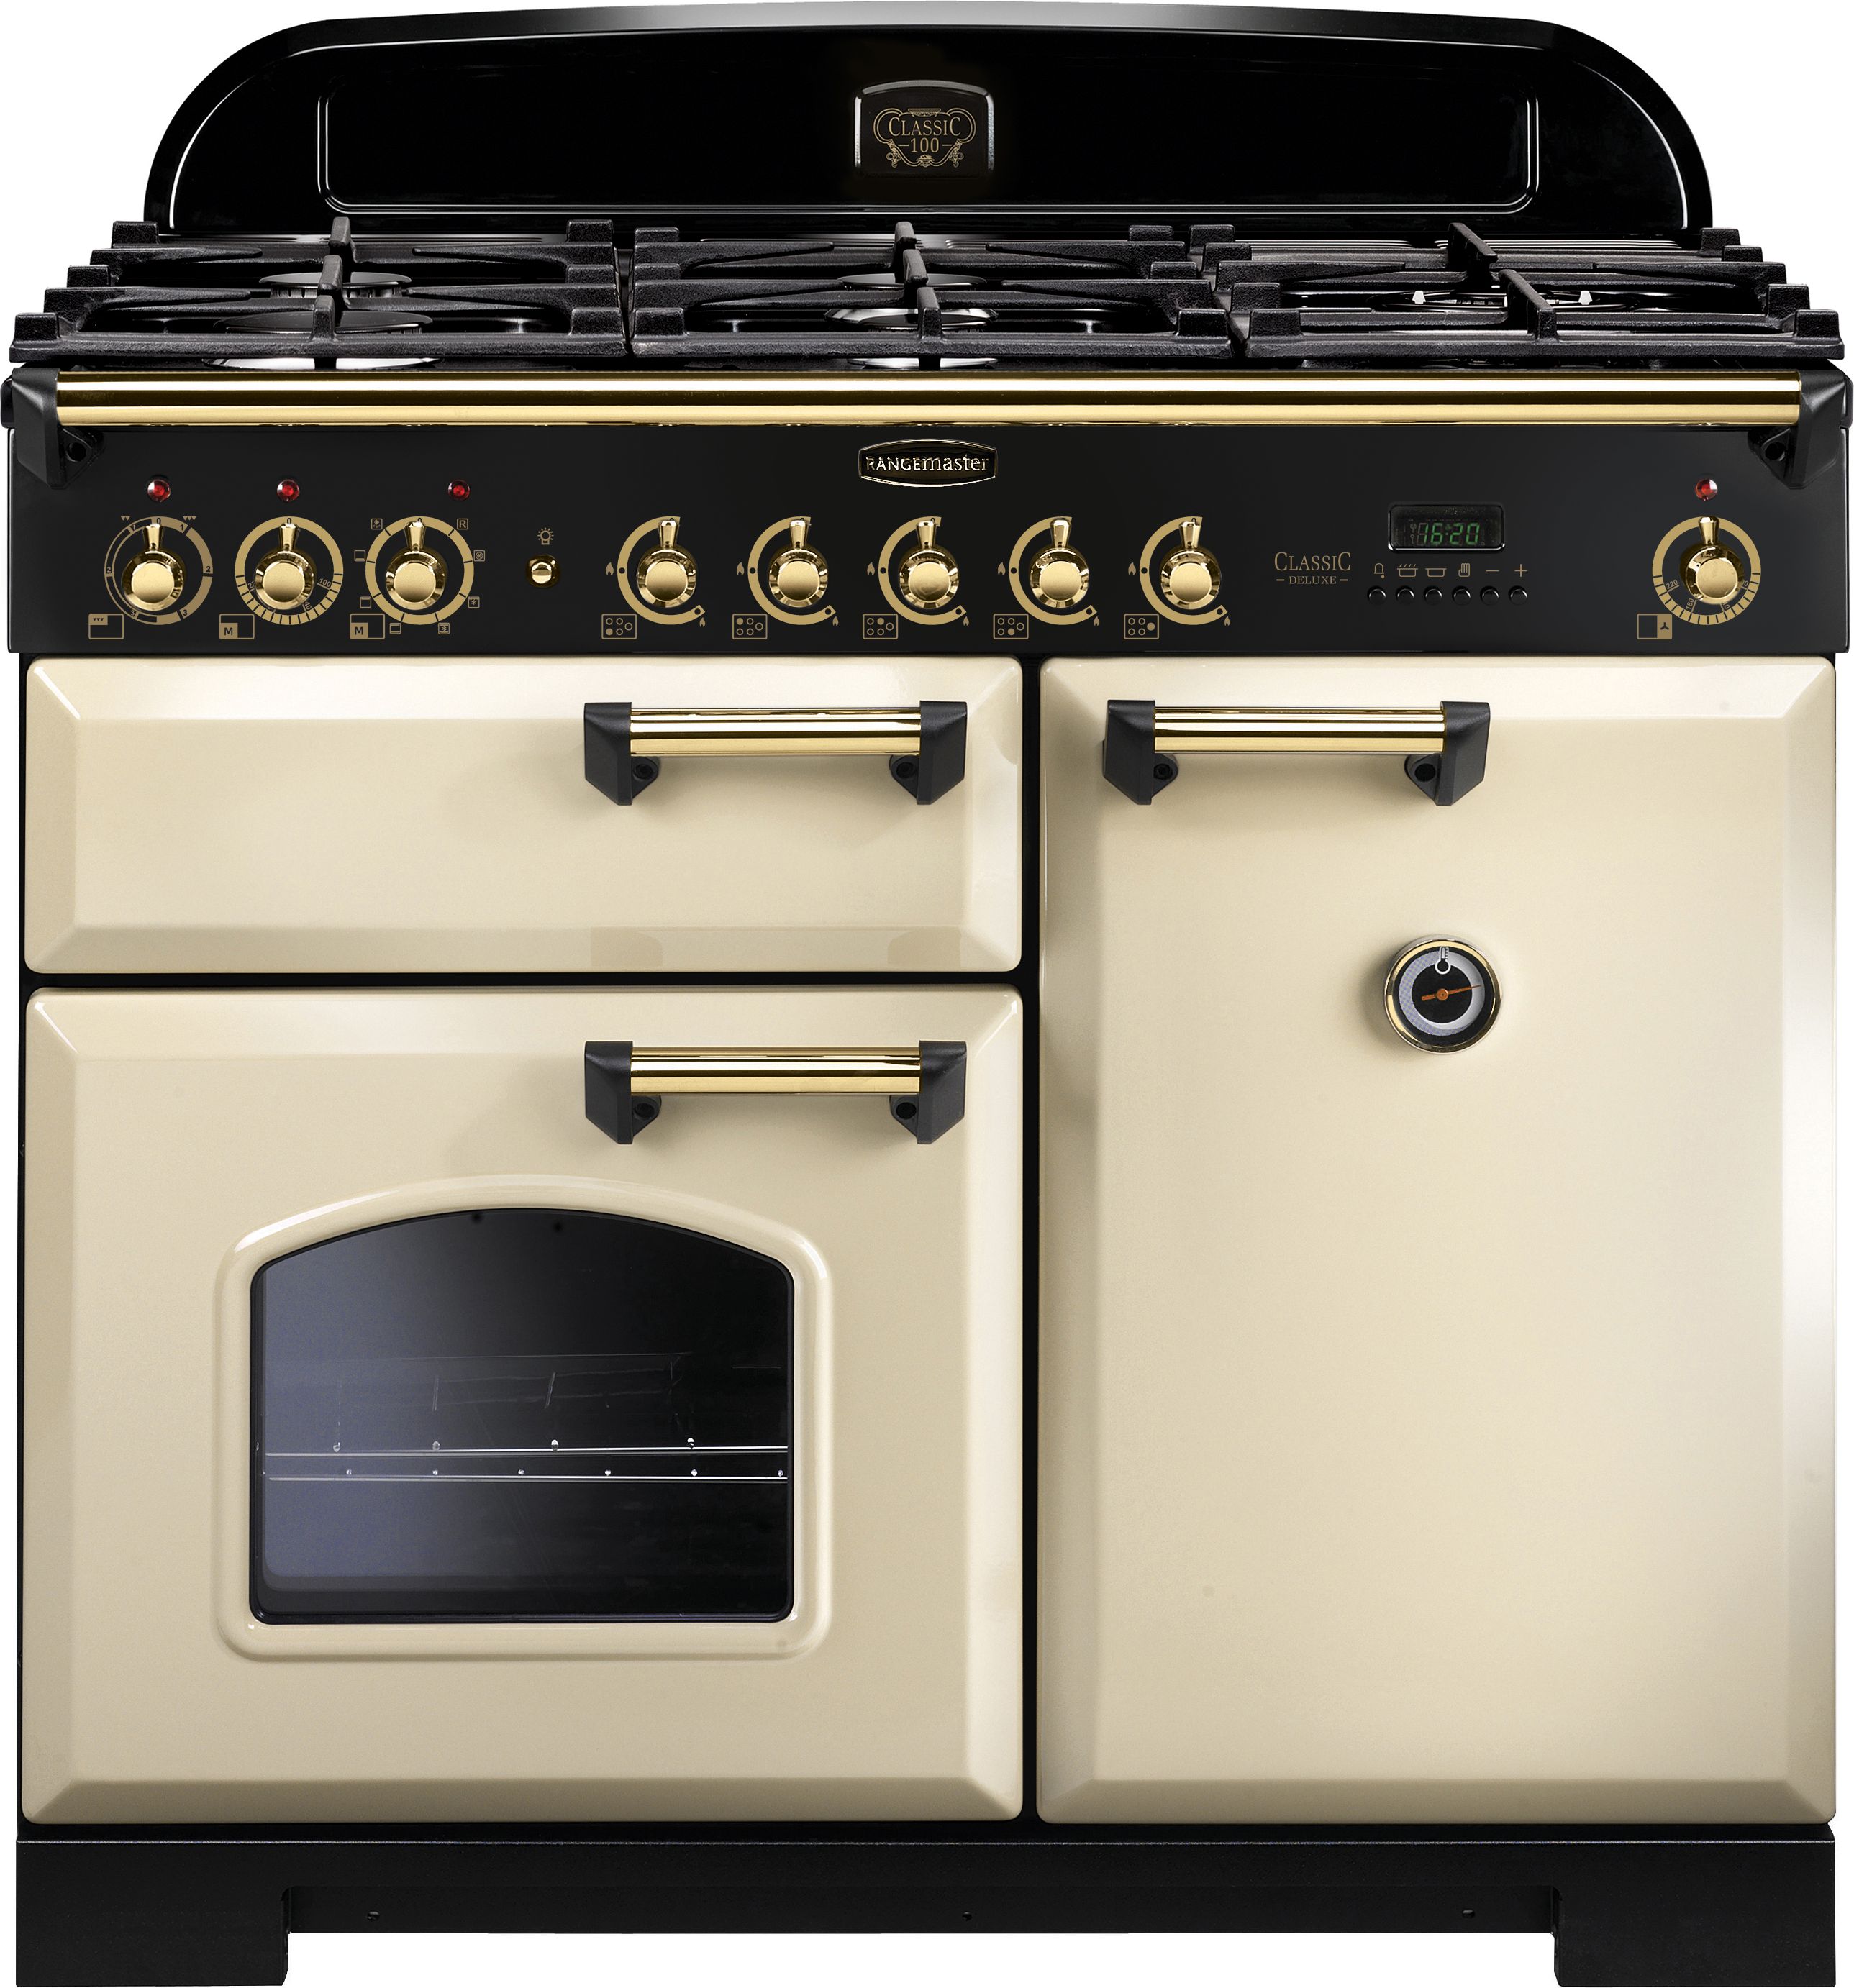 Rangemaster Classic Deluxe CDL100DFFCR/B 100cm Dual Fuel Range Cooker - Cream / Brass - A/A Rated, Cream